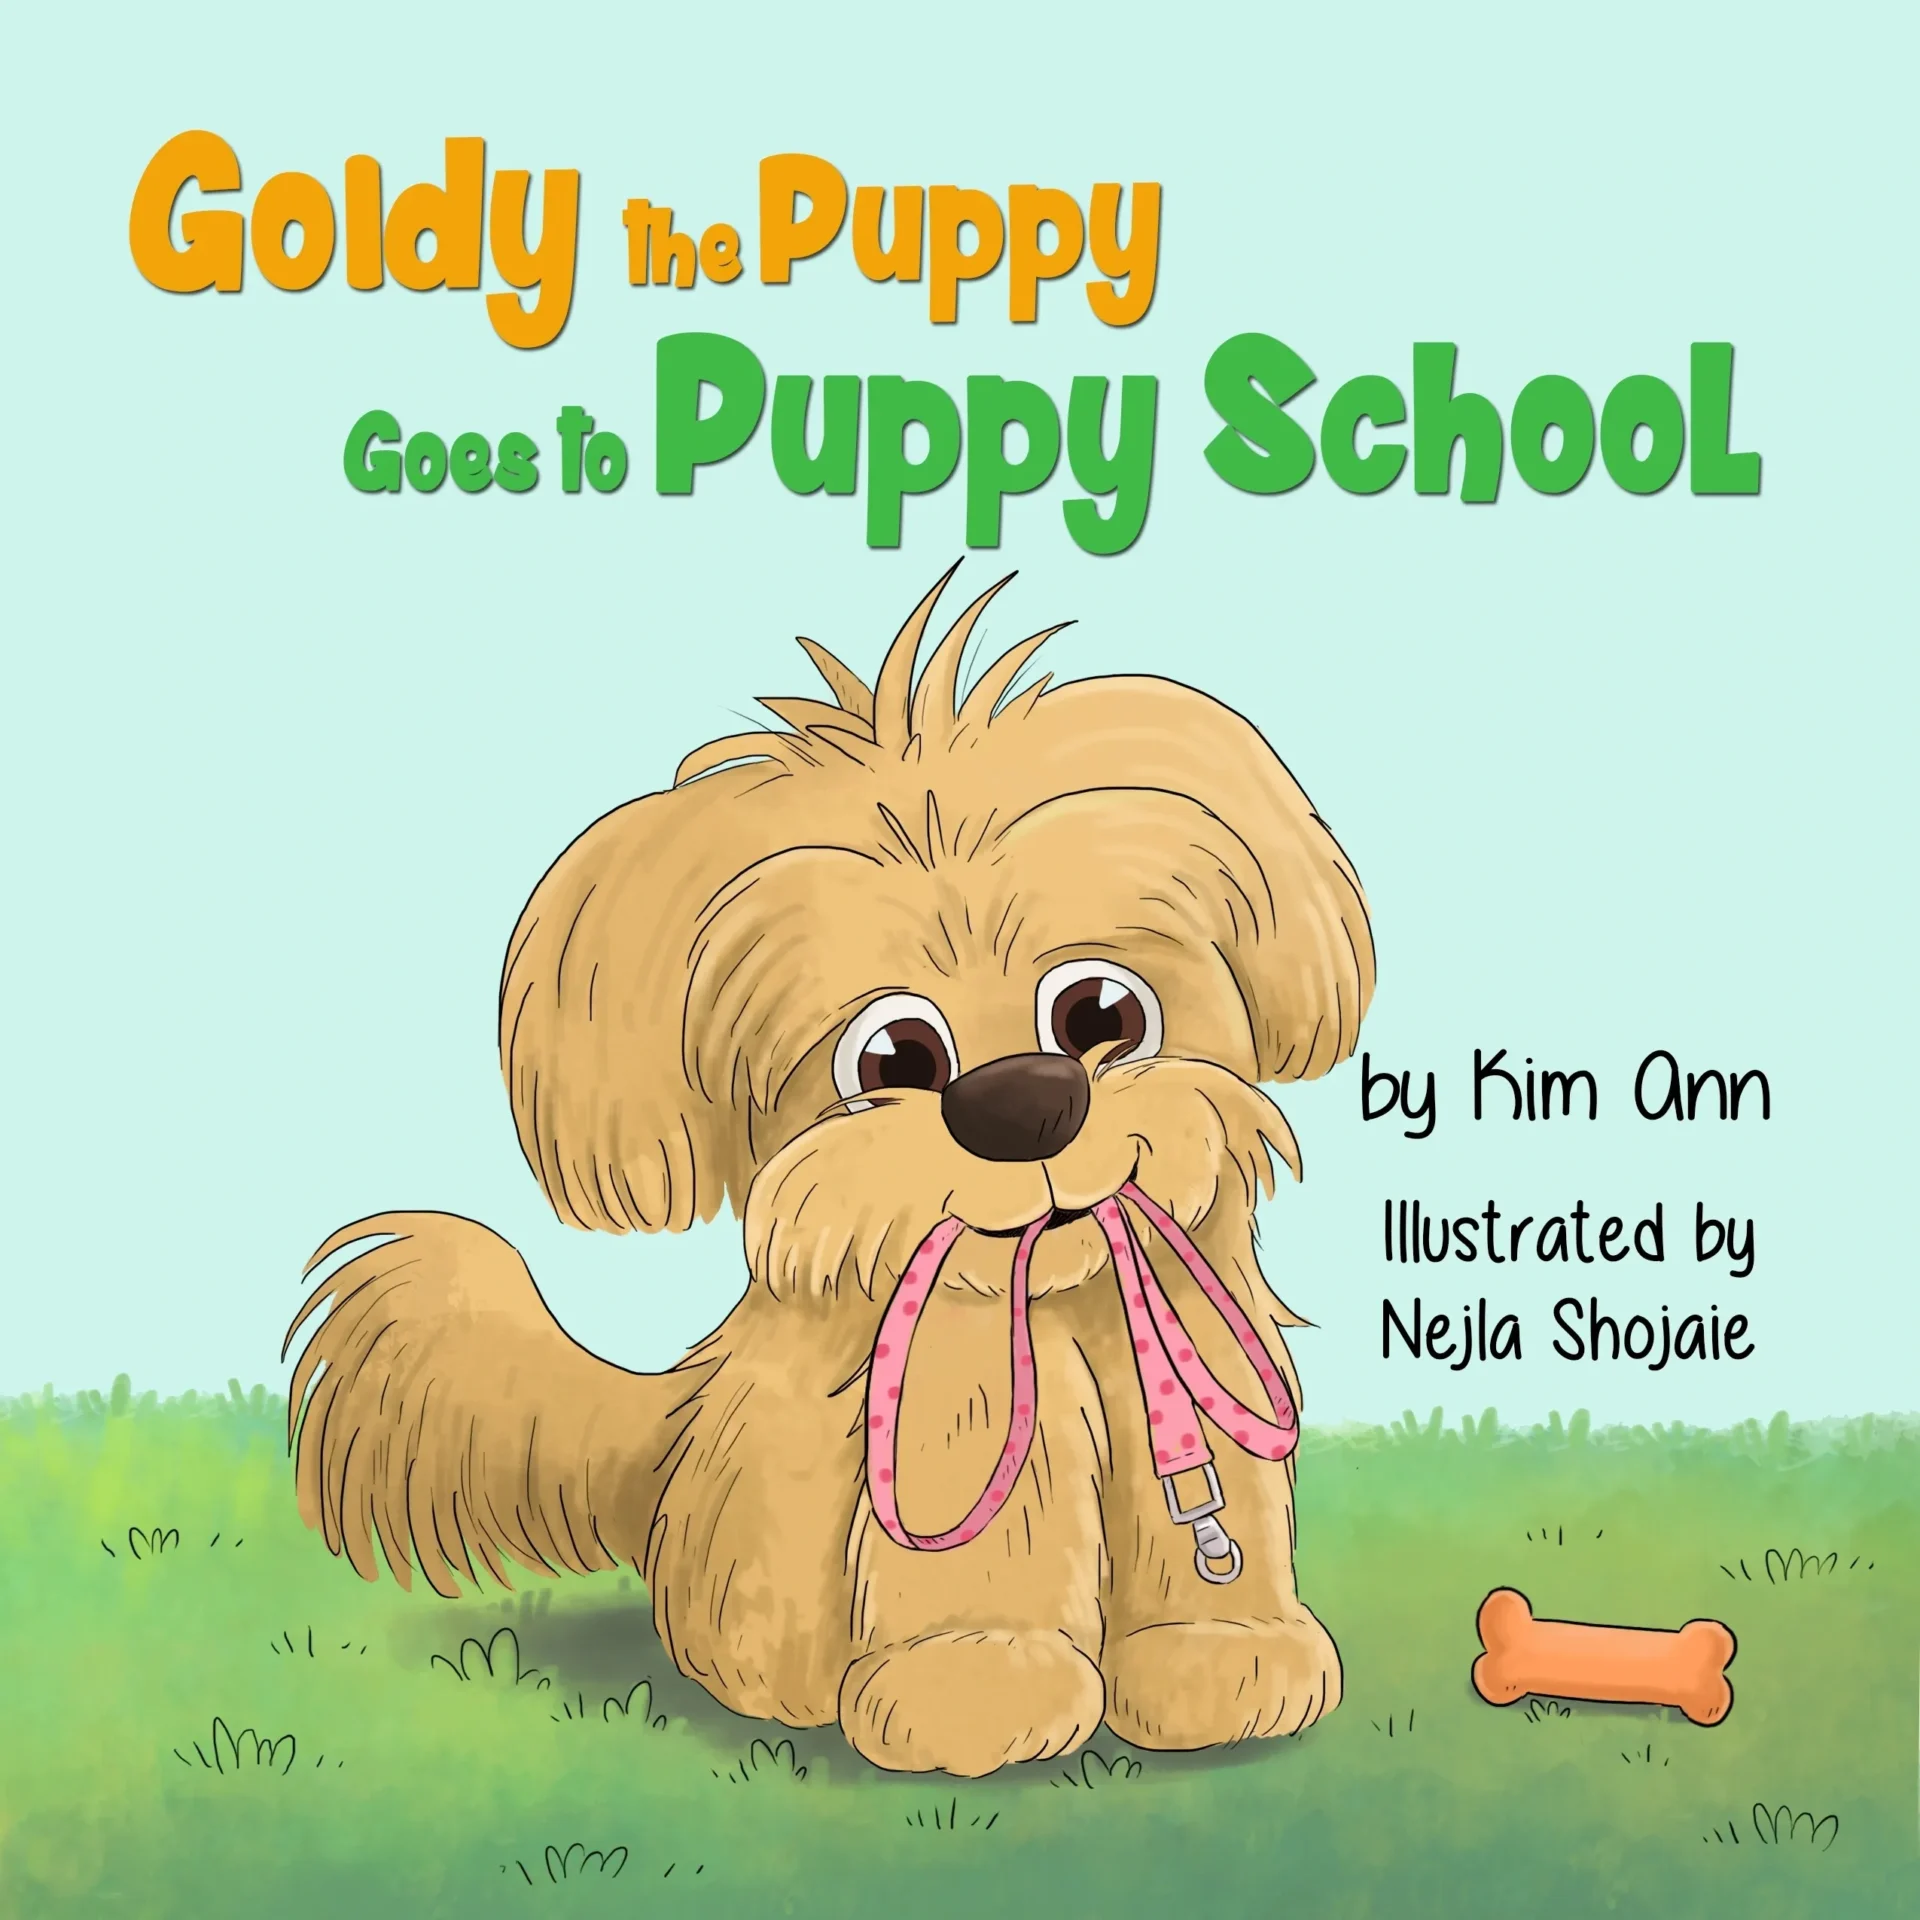 Goldy the puppy goes to puppy school